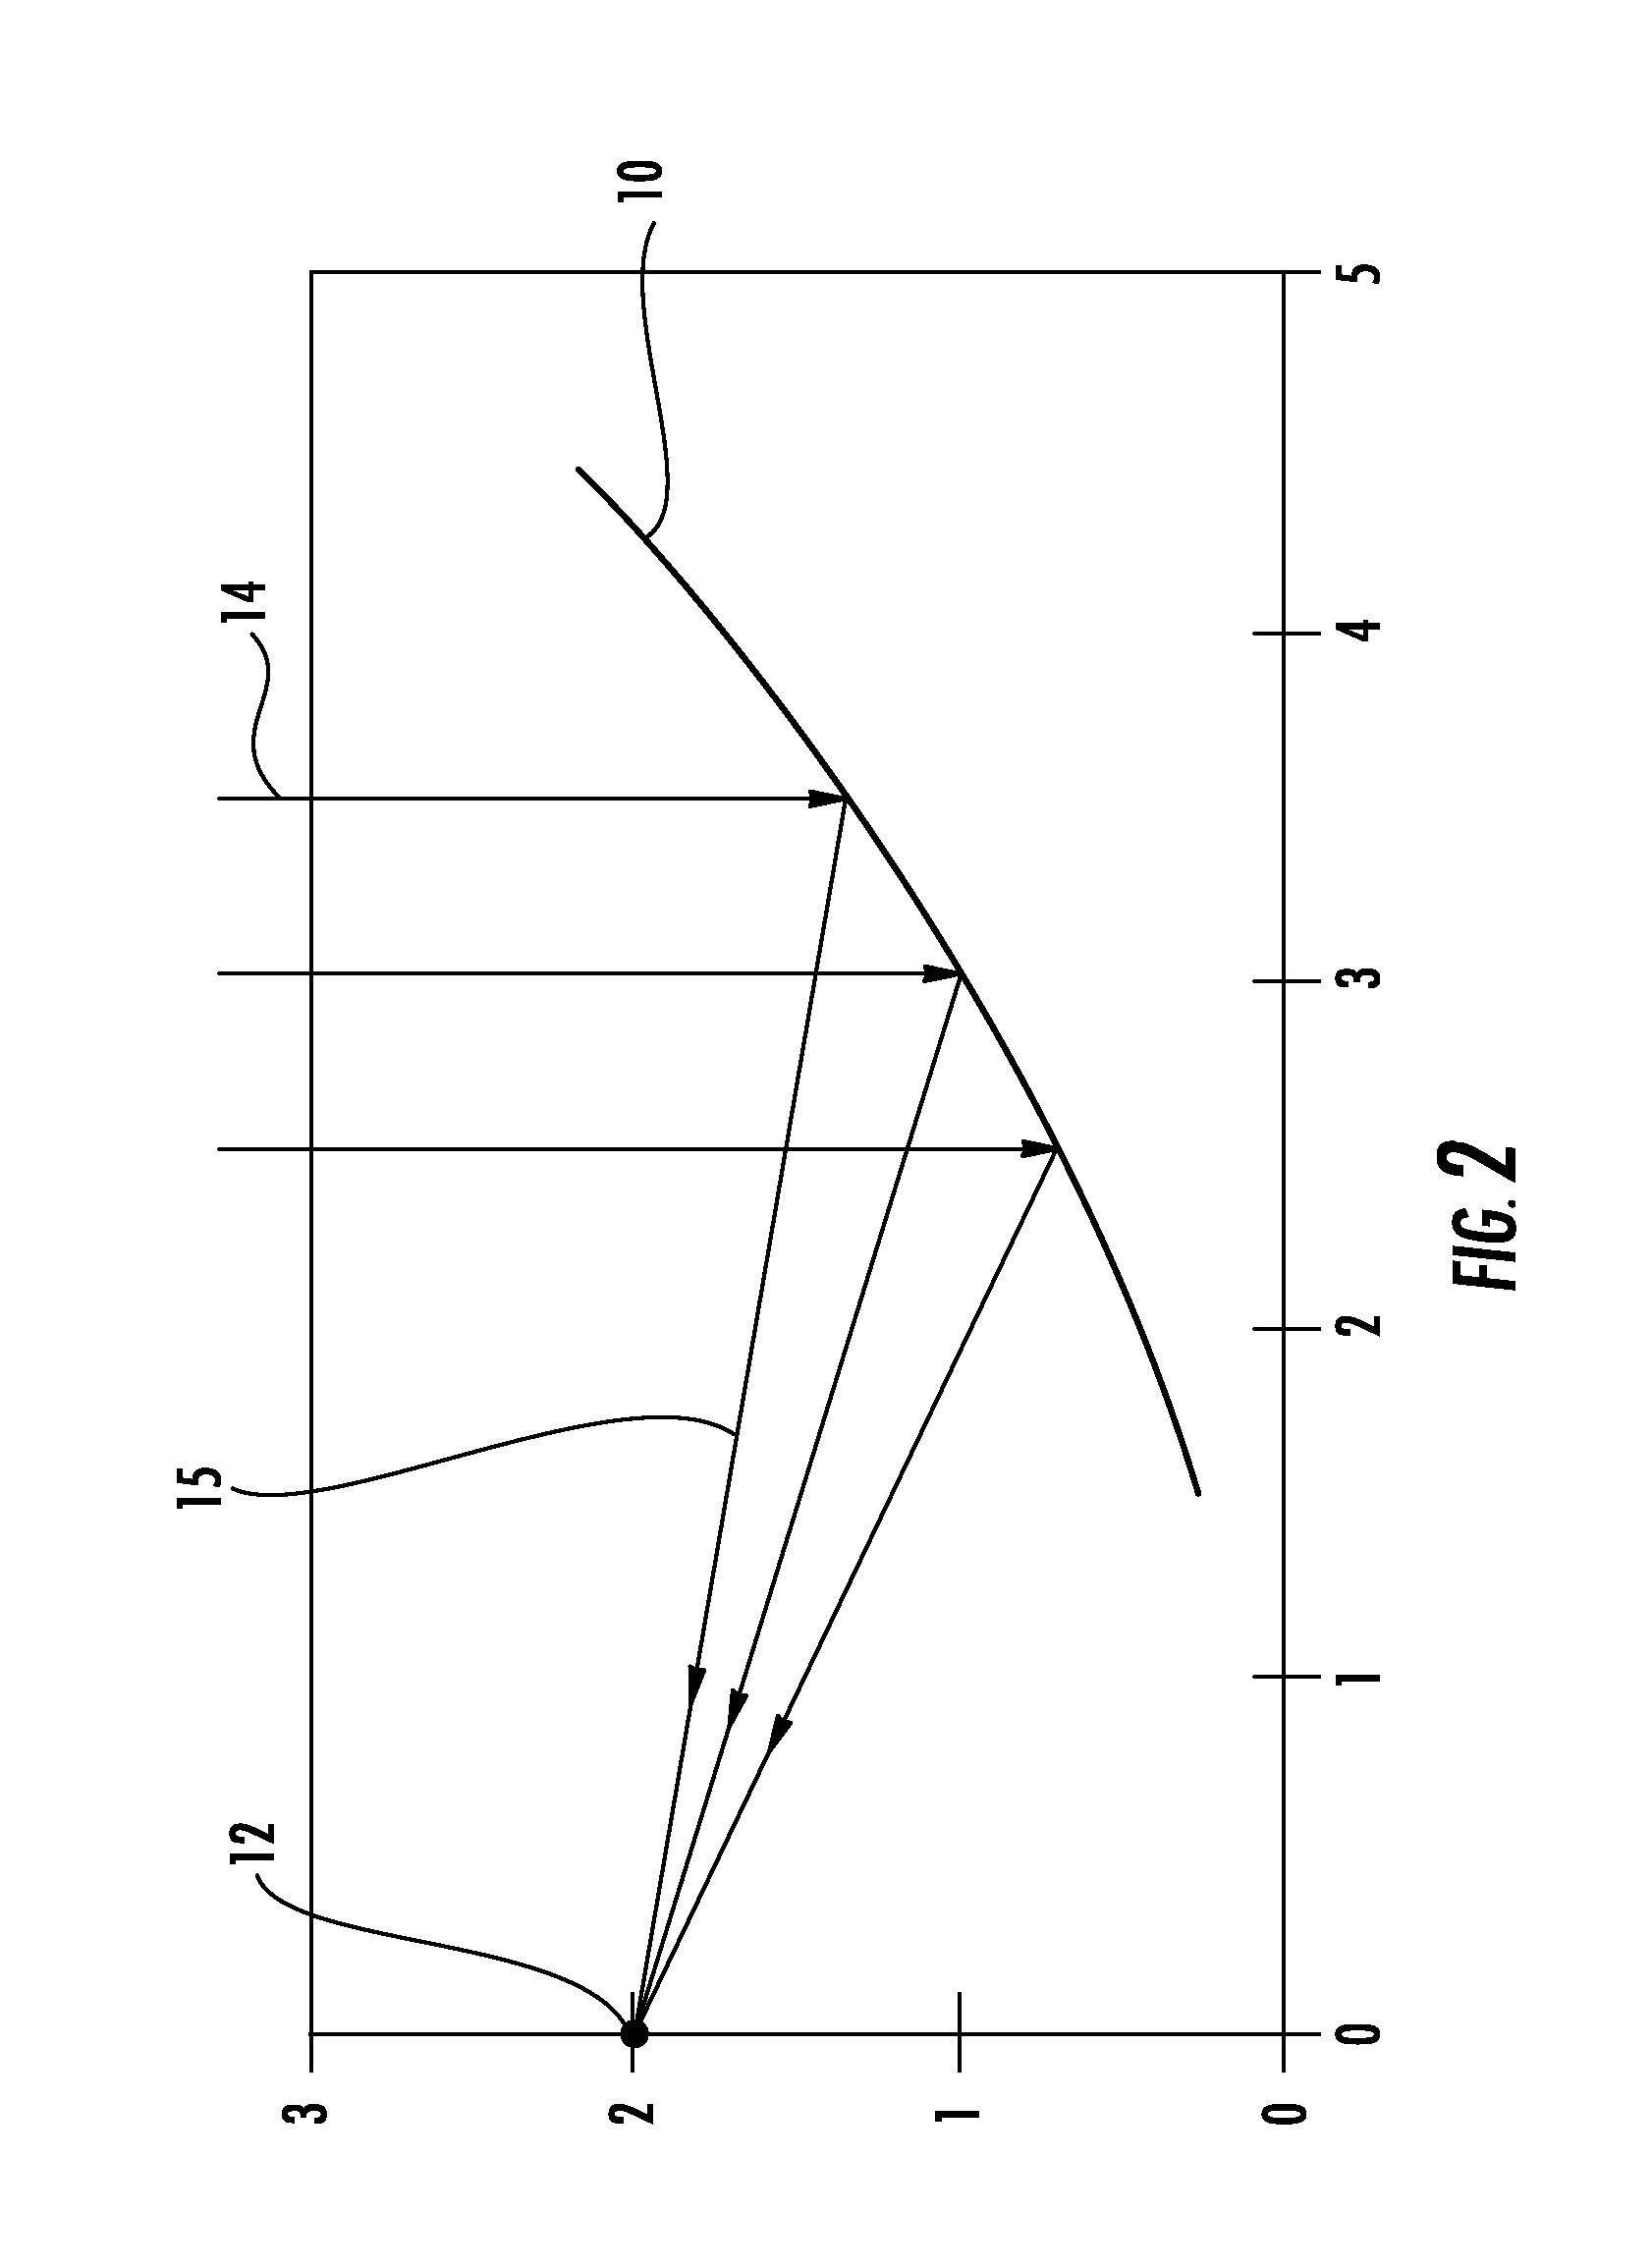 Apparatuses and methods for providing a secondary reflector on a solar collector system